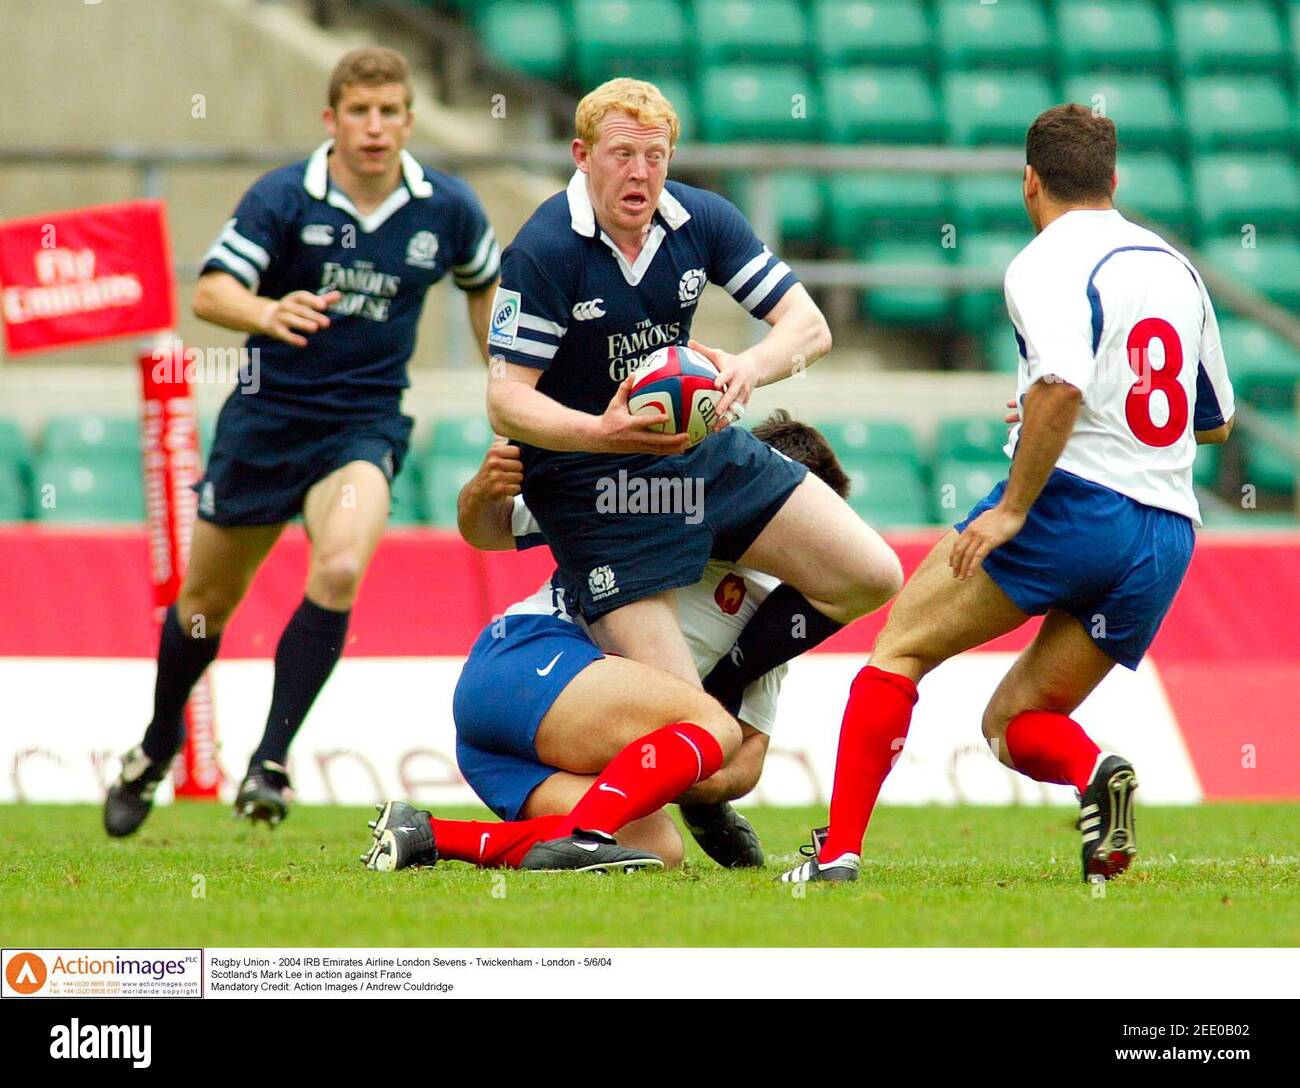 Rugby Union - 2004 IRB Emirates Airline London Sevens - Twickenham - London - 5/6/04  Scotland's Mark Lee in action against France  Mandatory Credit: Action Images / Andrew Couldridge Stock Photo